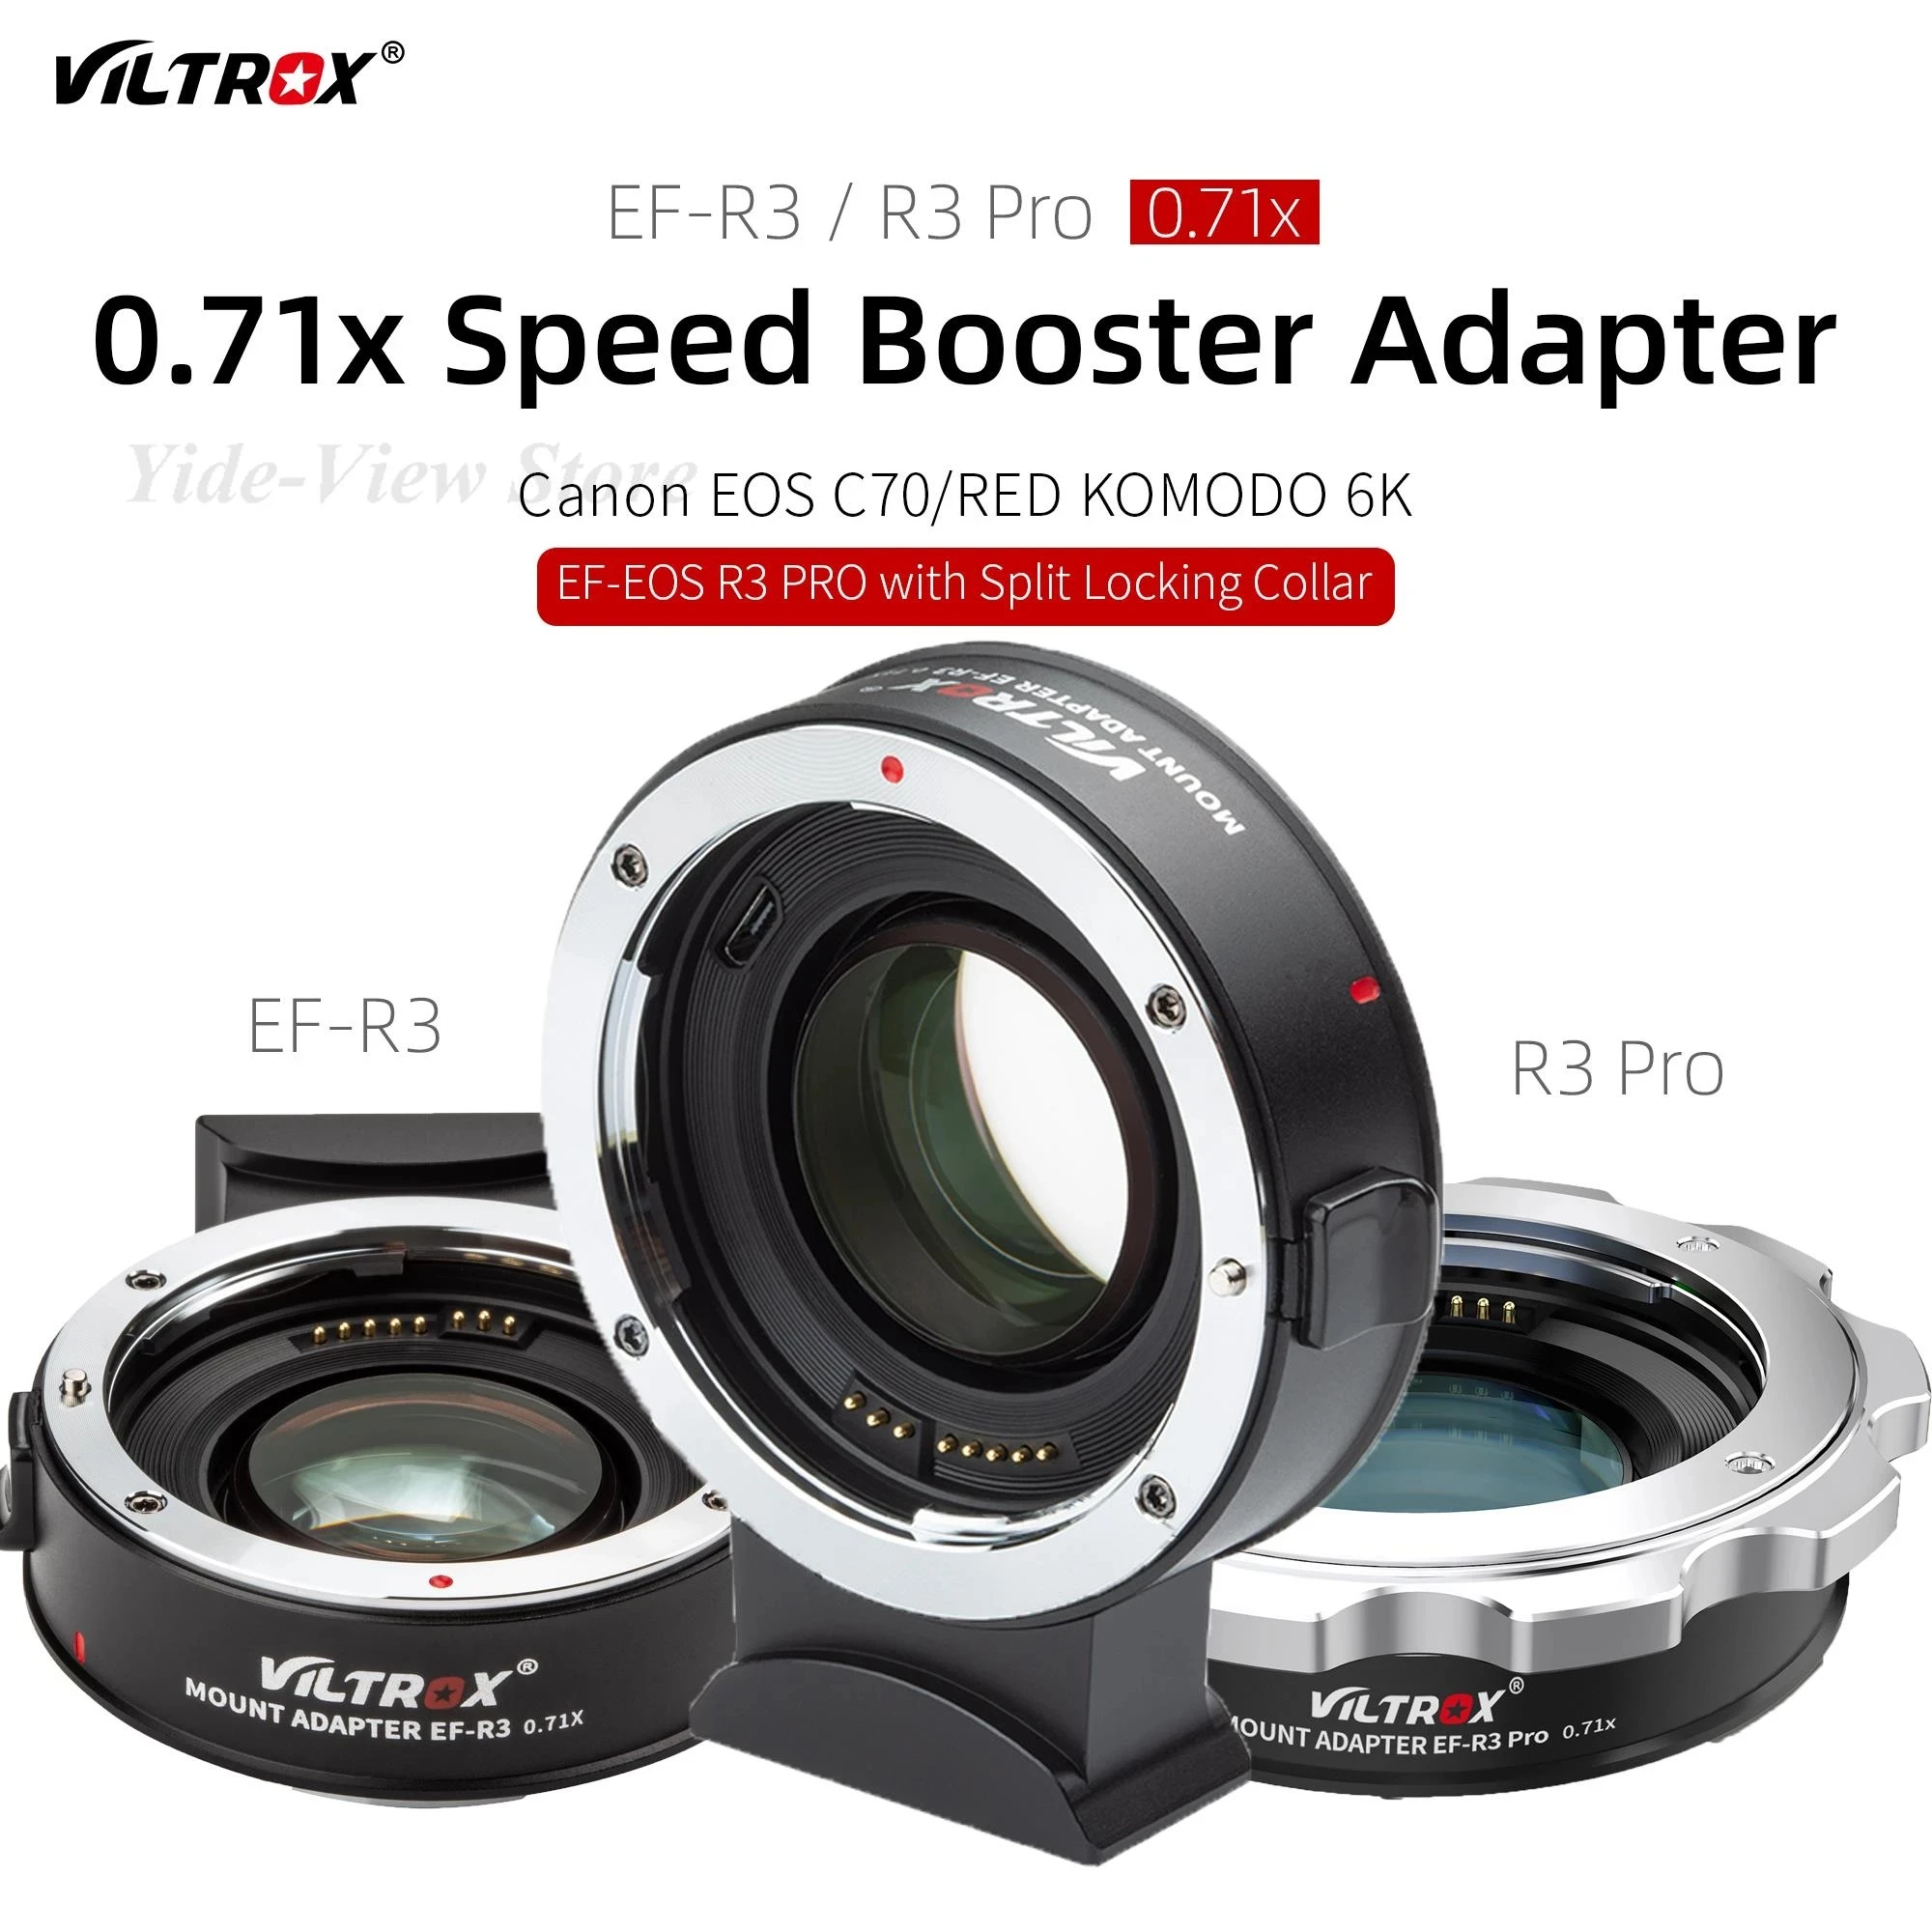 

VILTROX EF-R3 Pro 0.71x Speed Booster Auto Focus Full Frame Adapter Canon EF Lens to RF Camera RP R3 R5 R6 EOS C70 RED KOMODO 6K